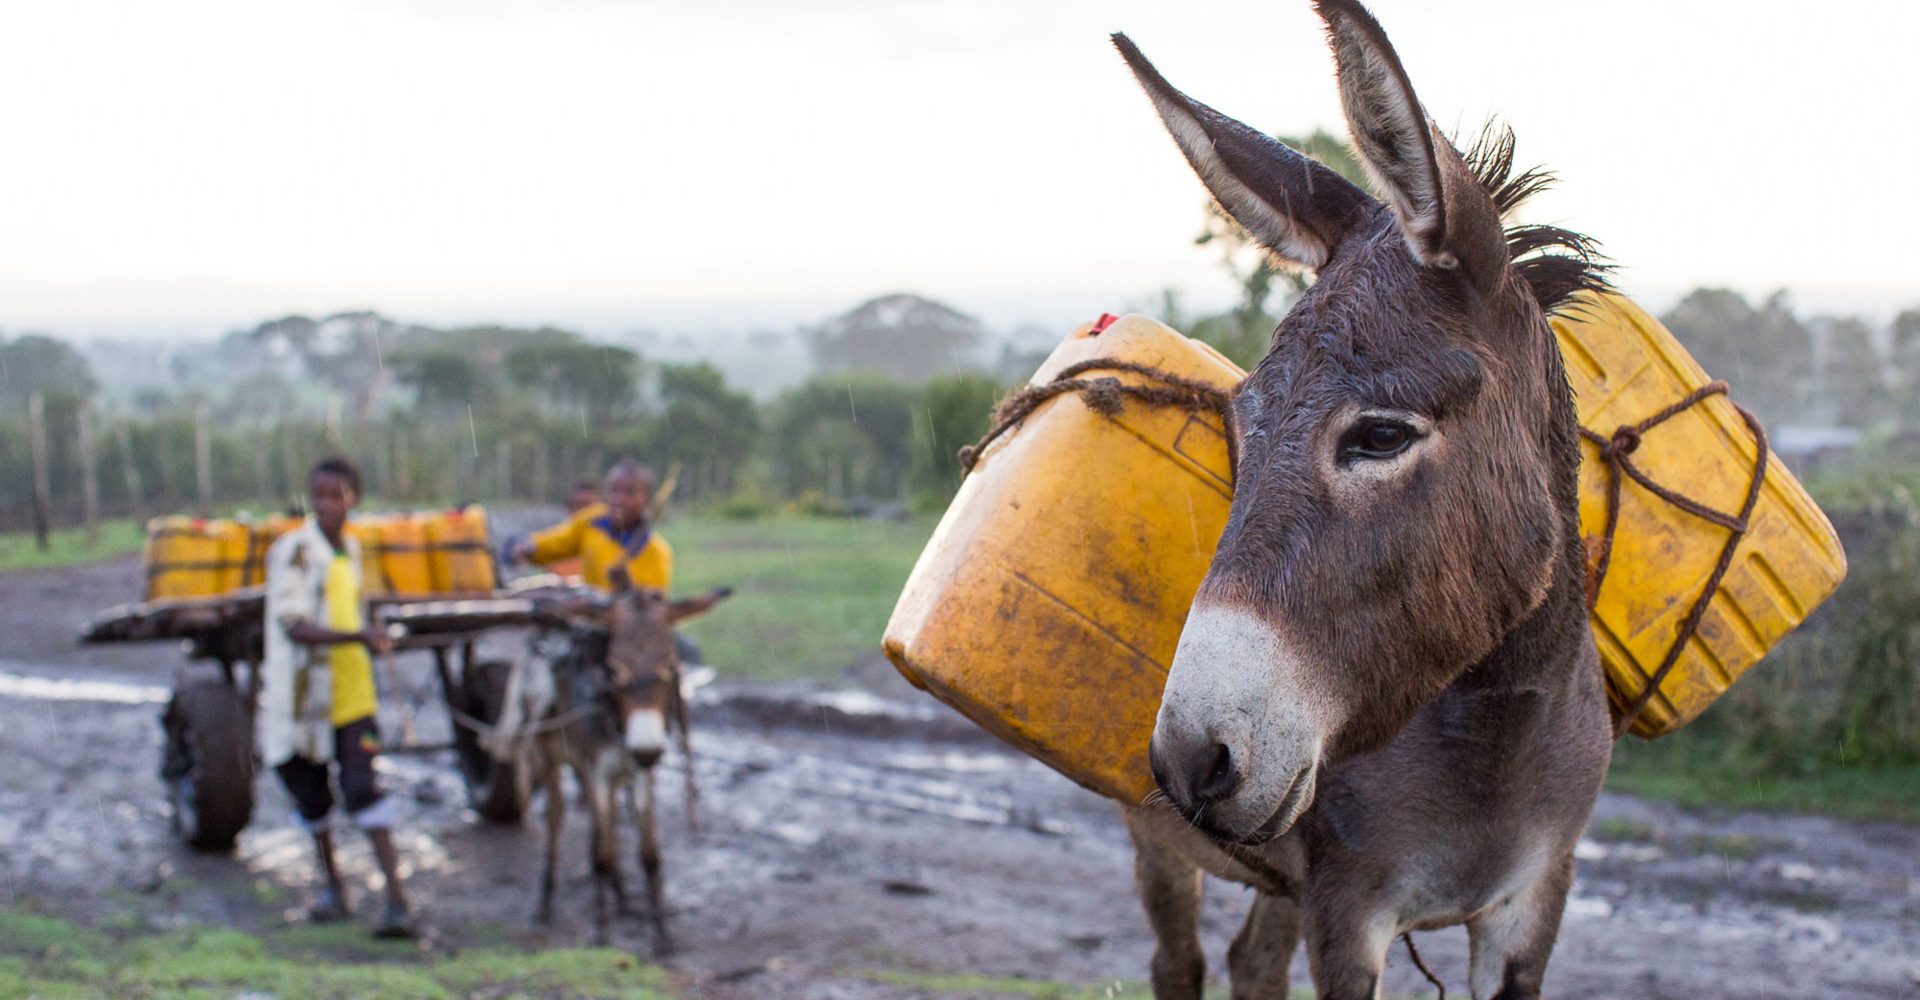 Donkey on the right hand side carrying 2 yellow water barrels.